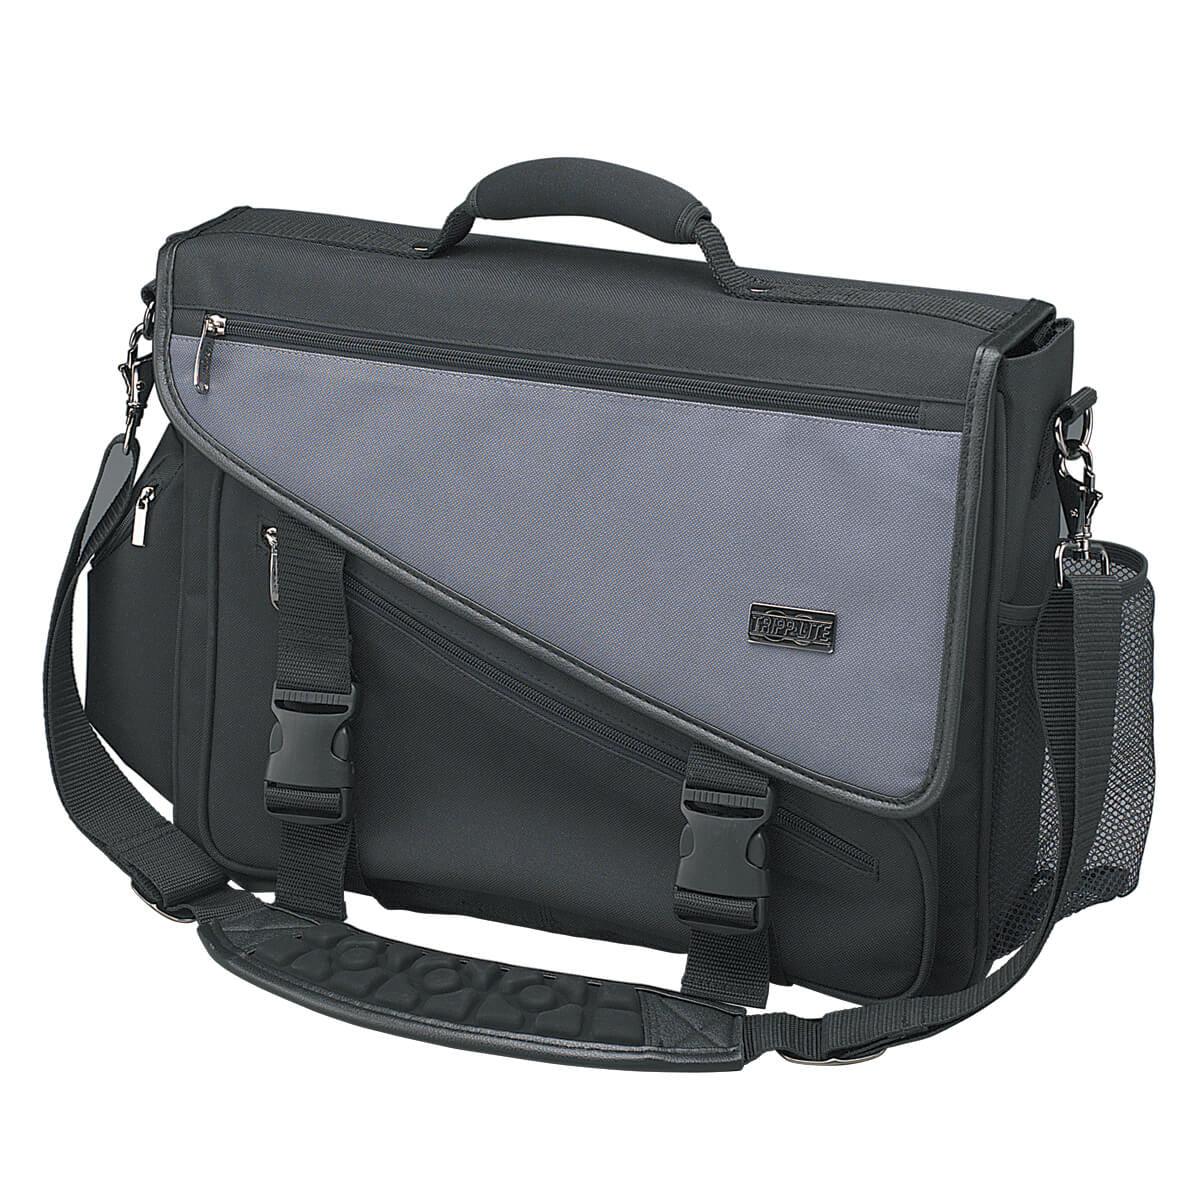 Tripp Lite Nb1001Bk Profile Notebook Brief - Notebook/Laptop Computer Carrying Cases & Bags